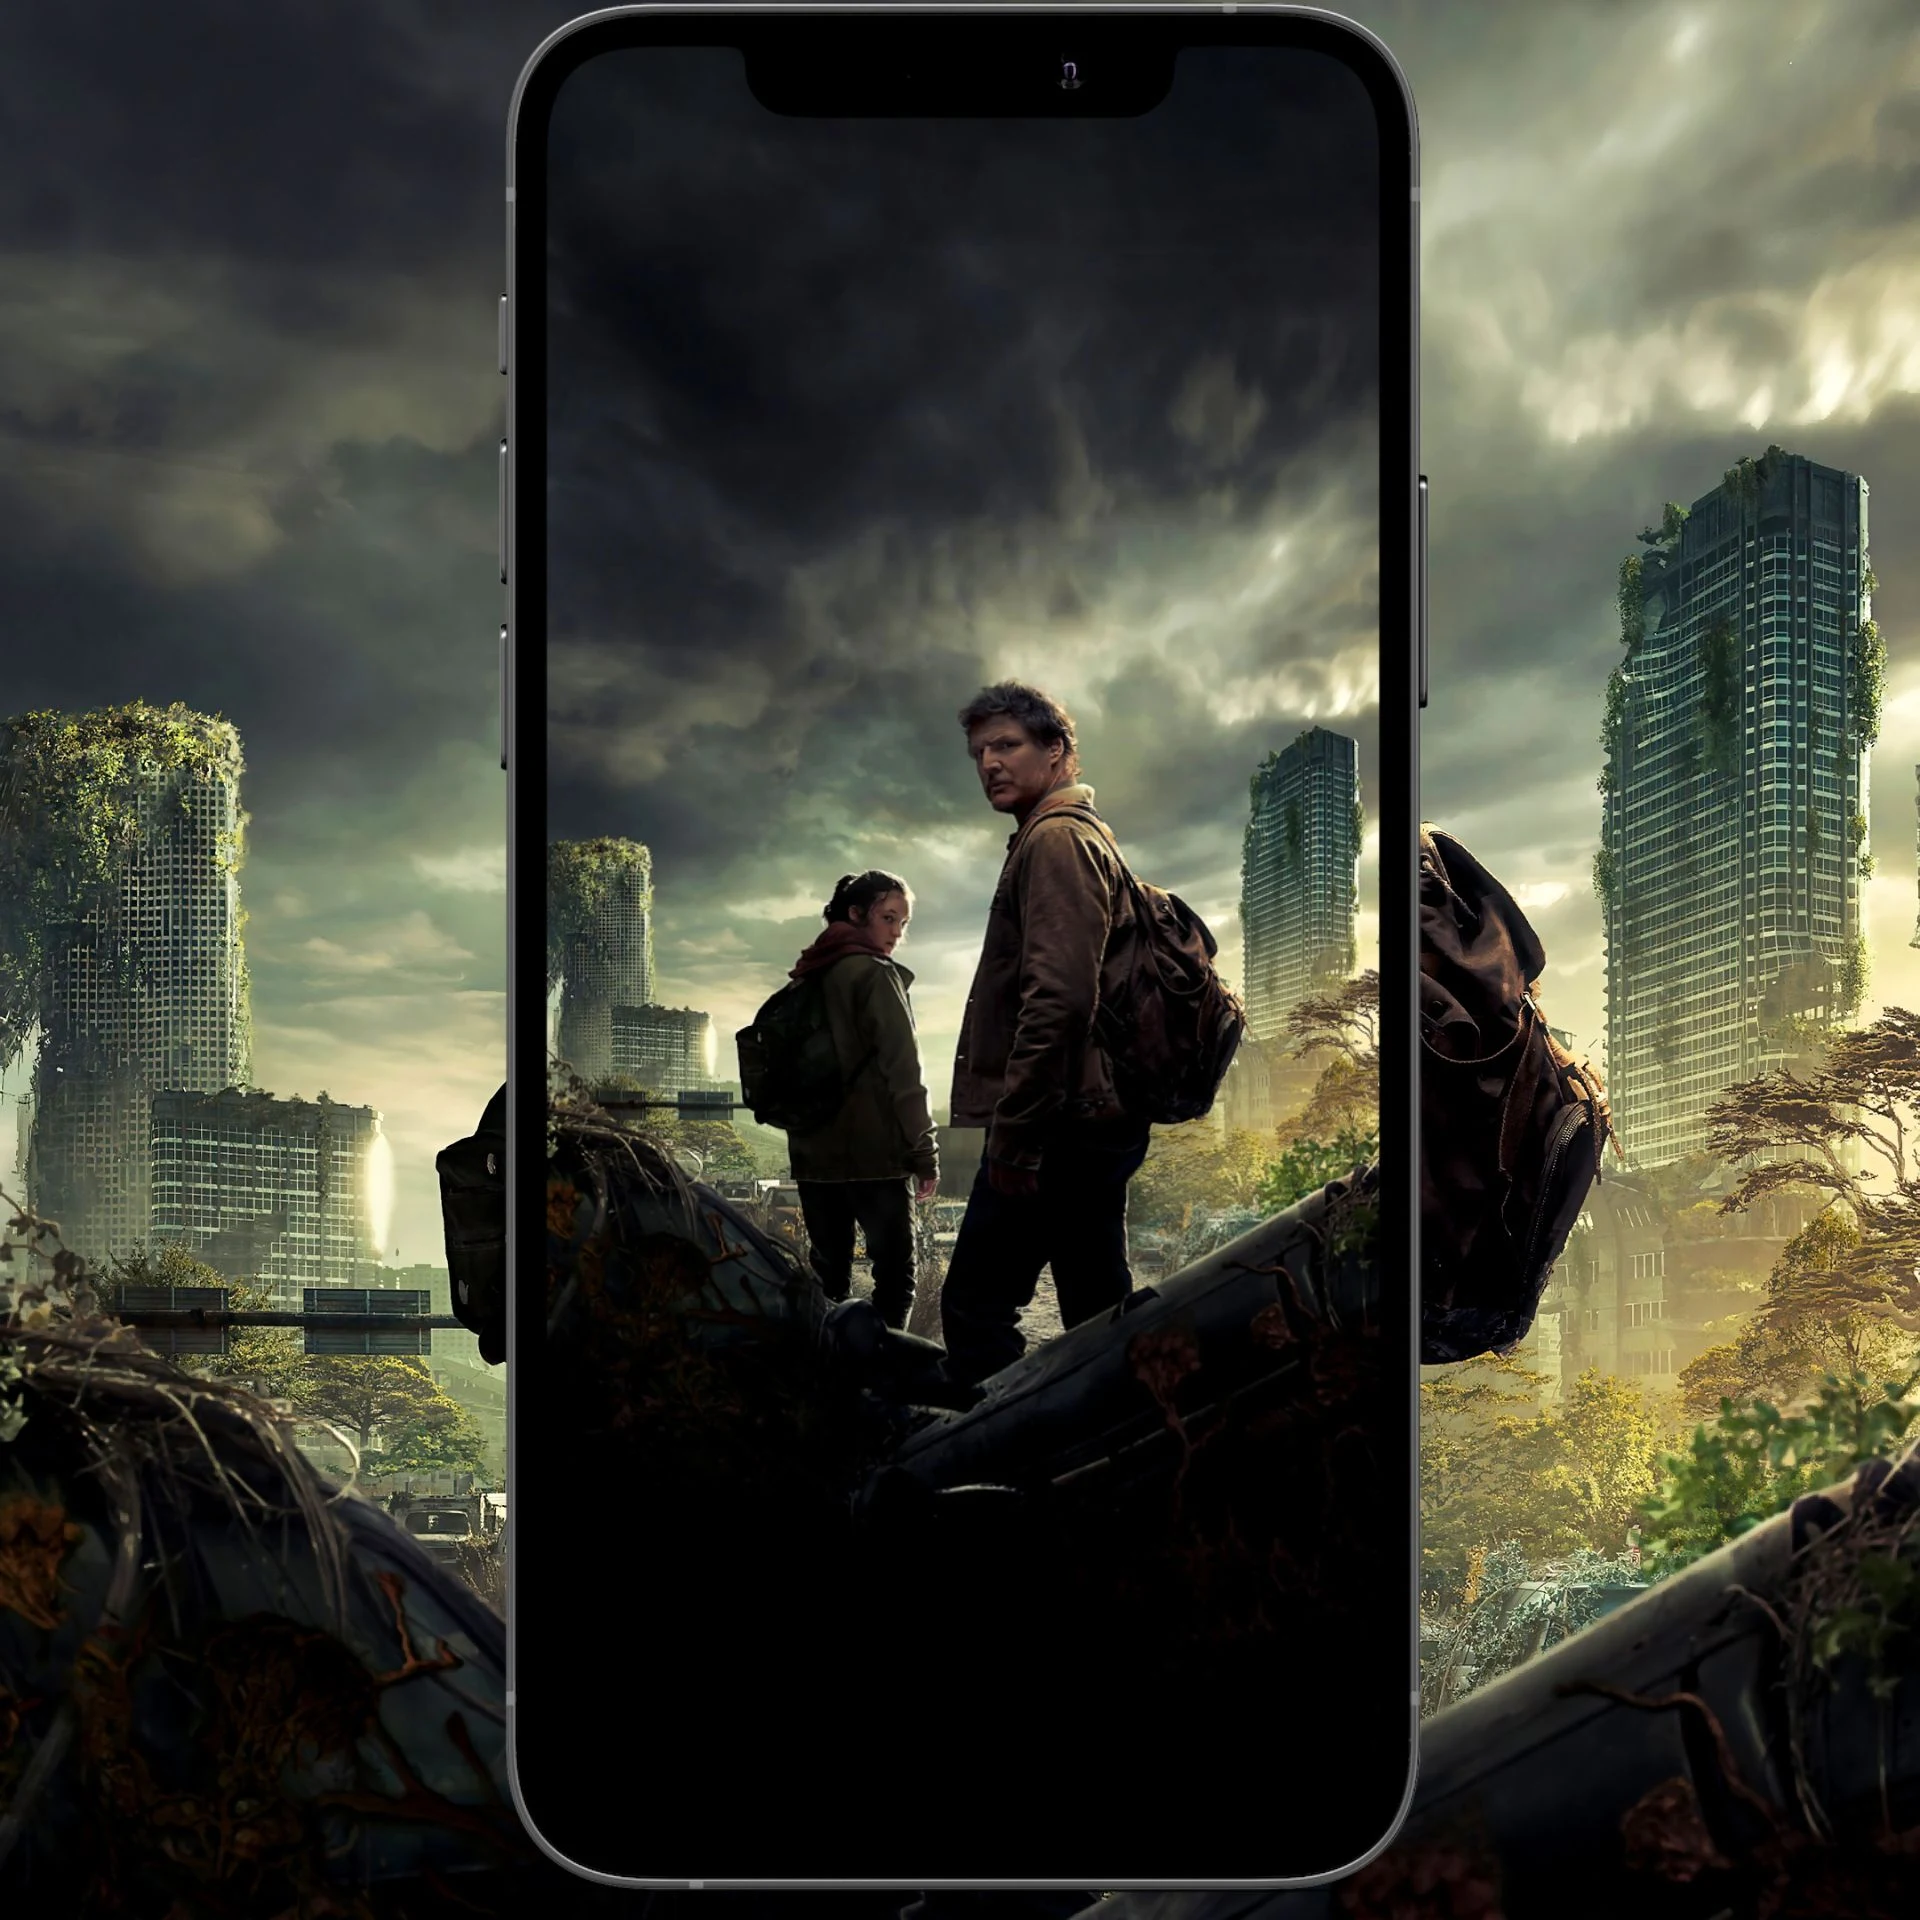  The Last Of Us Hintergrundbild 1920x1920. The Last of Us HBO Series: Get the Official Wallpaper for Your Phone